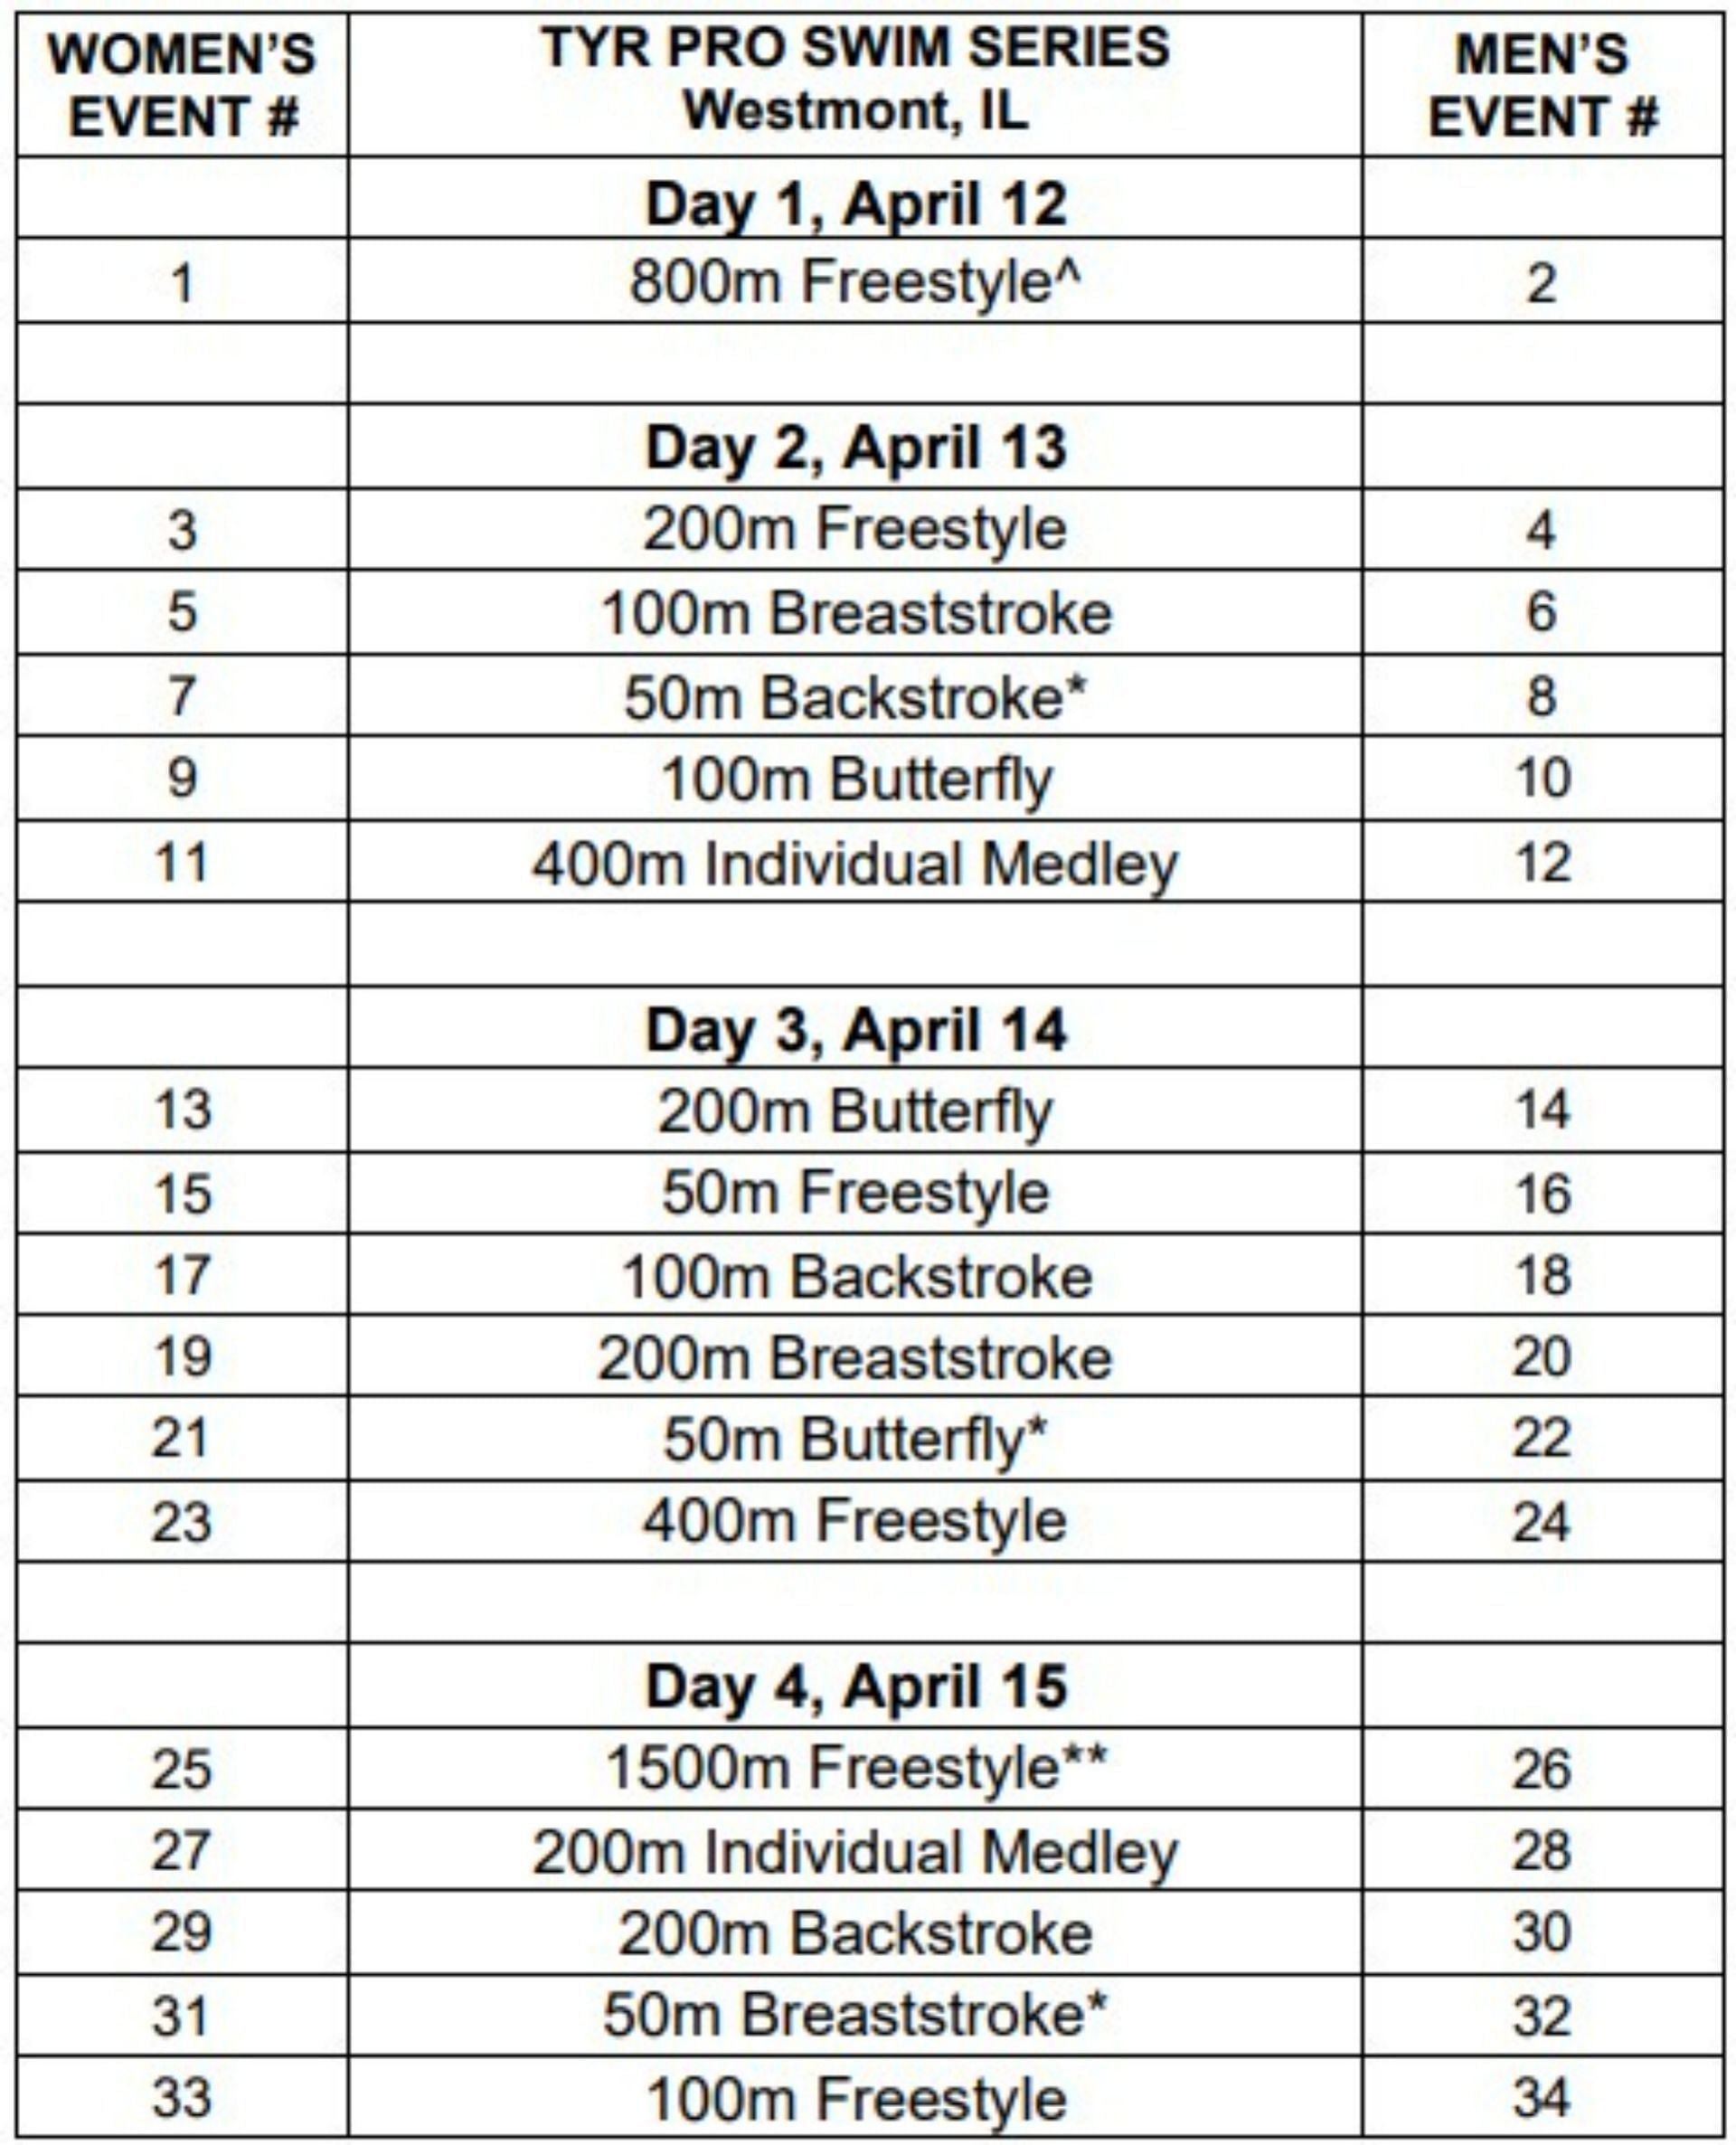 TYR Pro Series Westmont Schedule (Image via usaswimming.org)